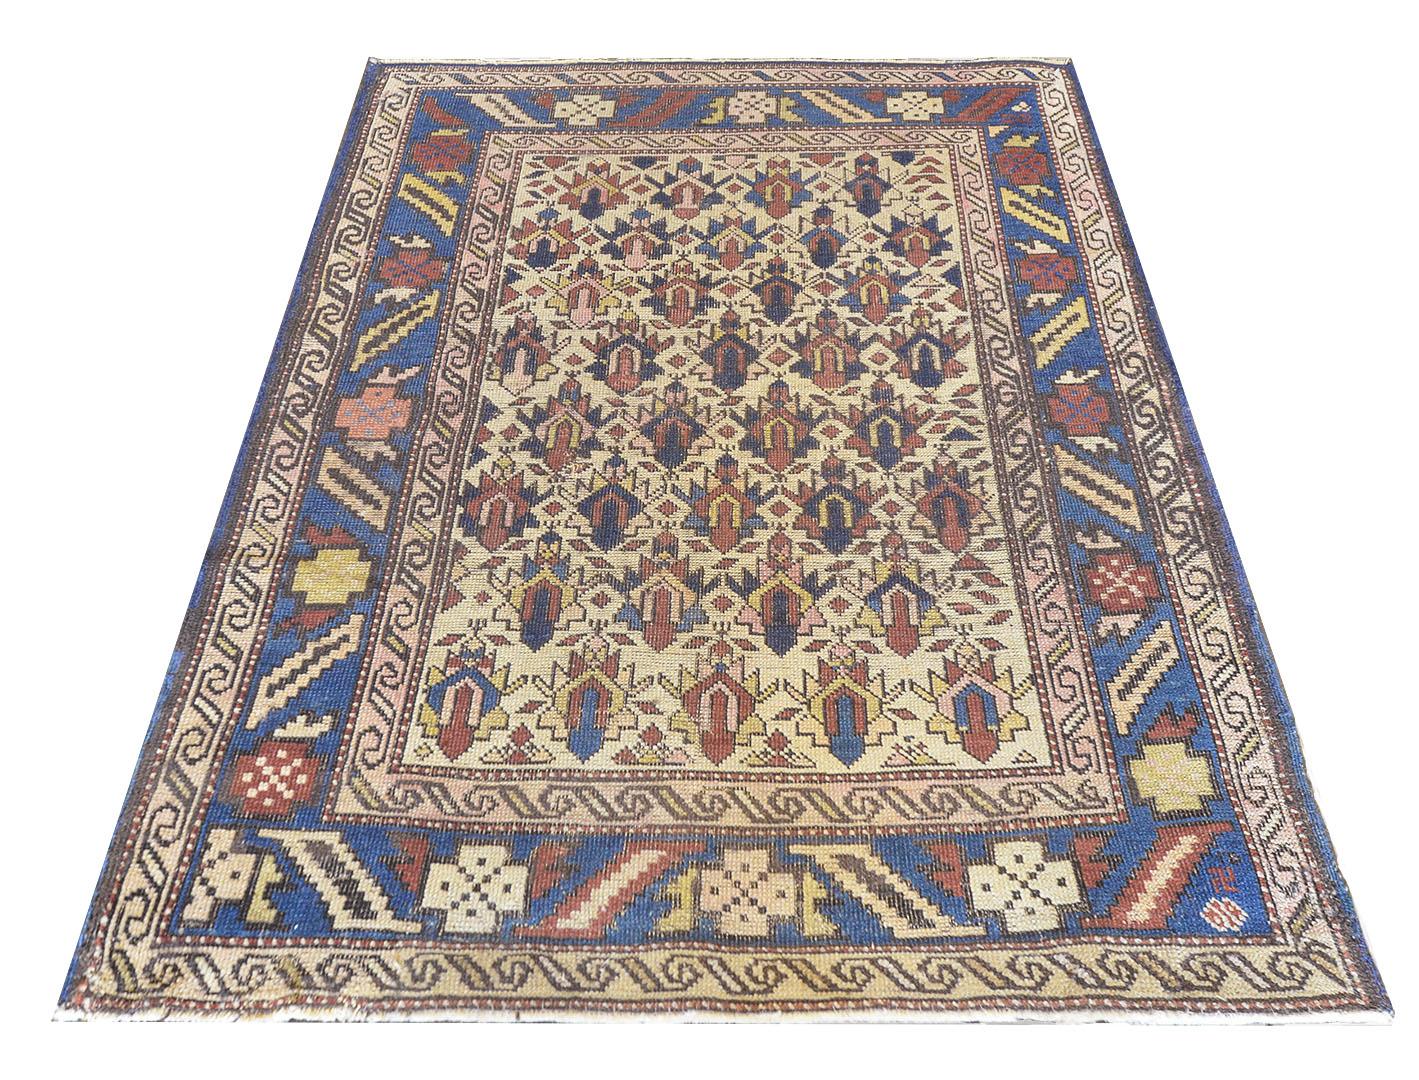 This traditional handwoven Caucasian rug has an ivory field with patterned polychrome palmettes medallions enclosed in a royal blue border with alternating angled geometry and polychrome palmettes nestled between two scrolled ivory borders. A rare